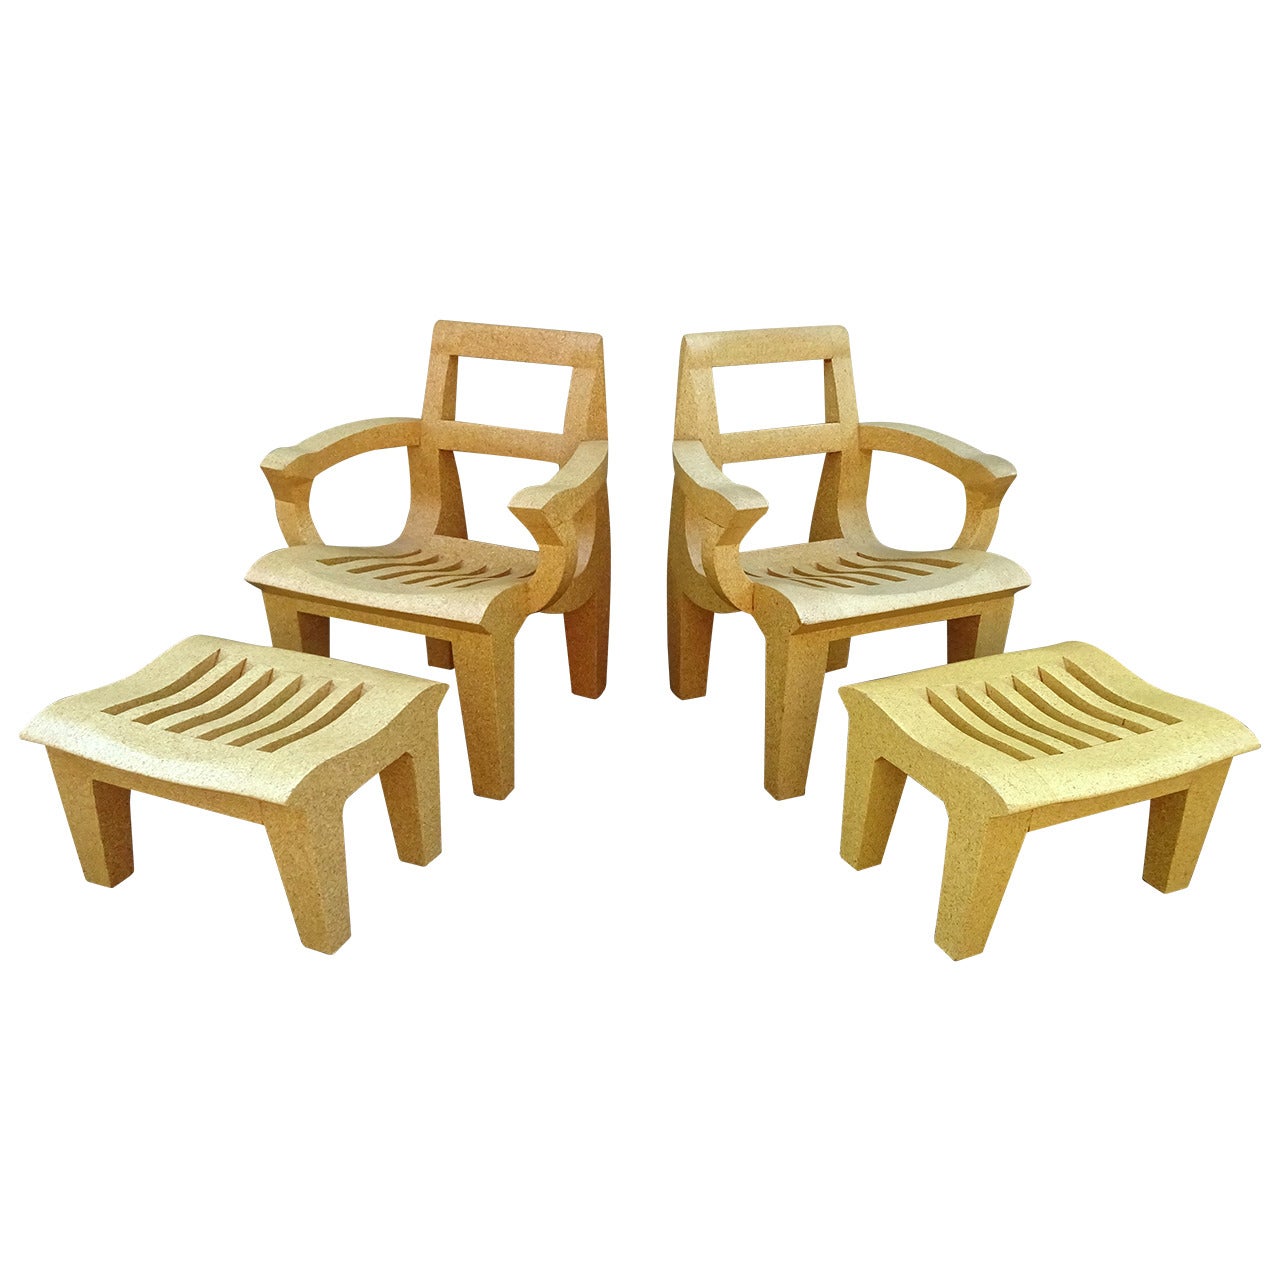 Sculptural Pair of Kevin Walz Solid Cork Lounge Chairs and Ottomans, 1998 For Sale